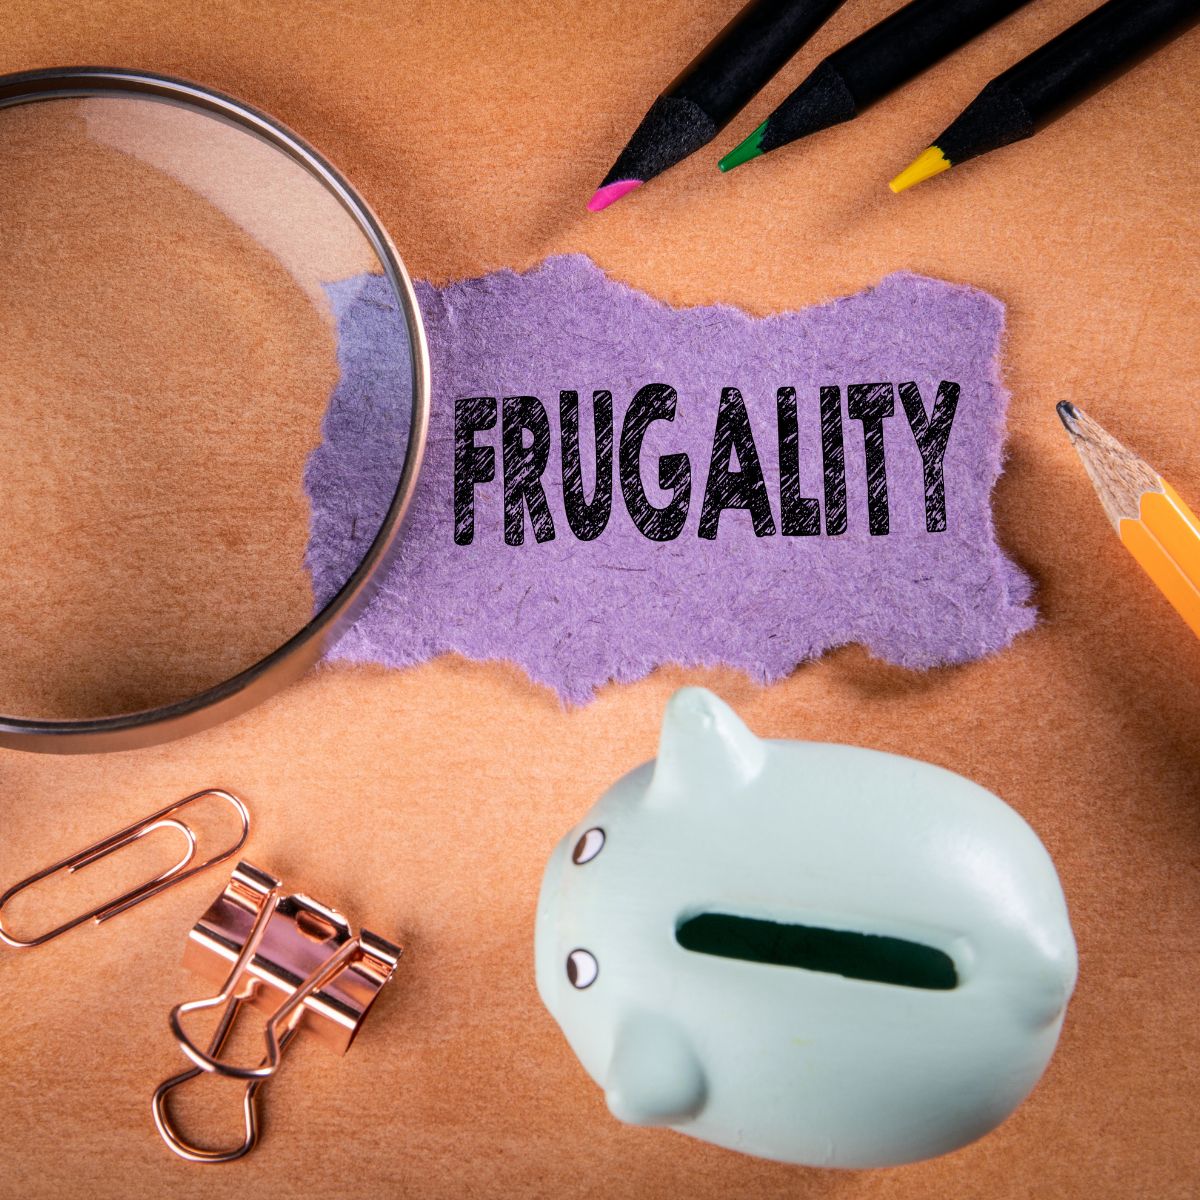 Habits of Highly Frugal People That Save Lots